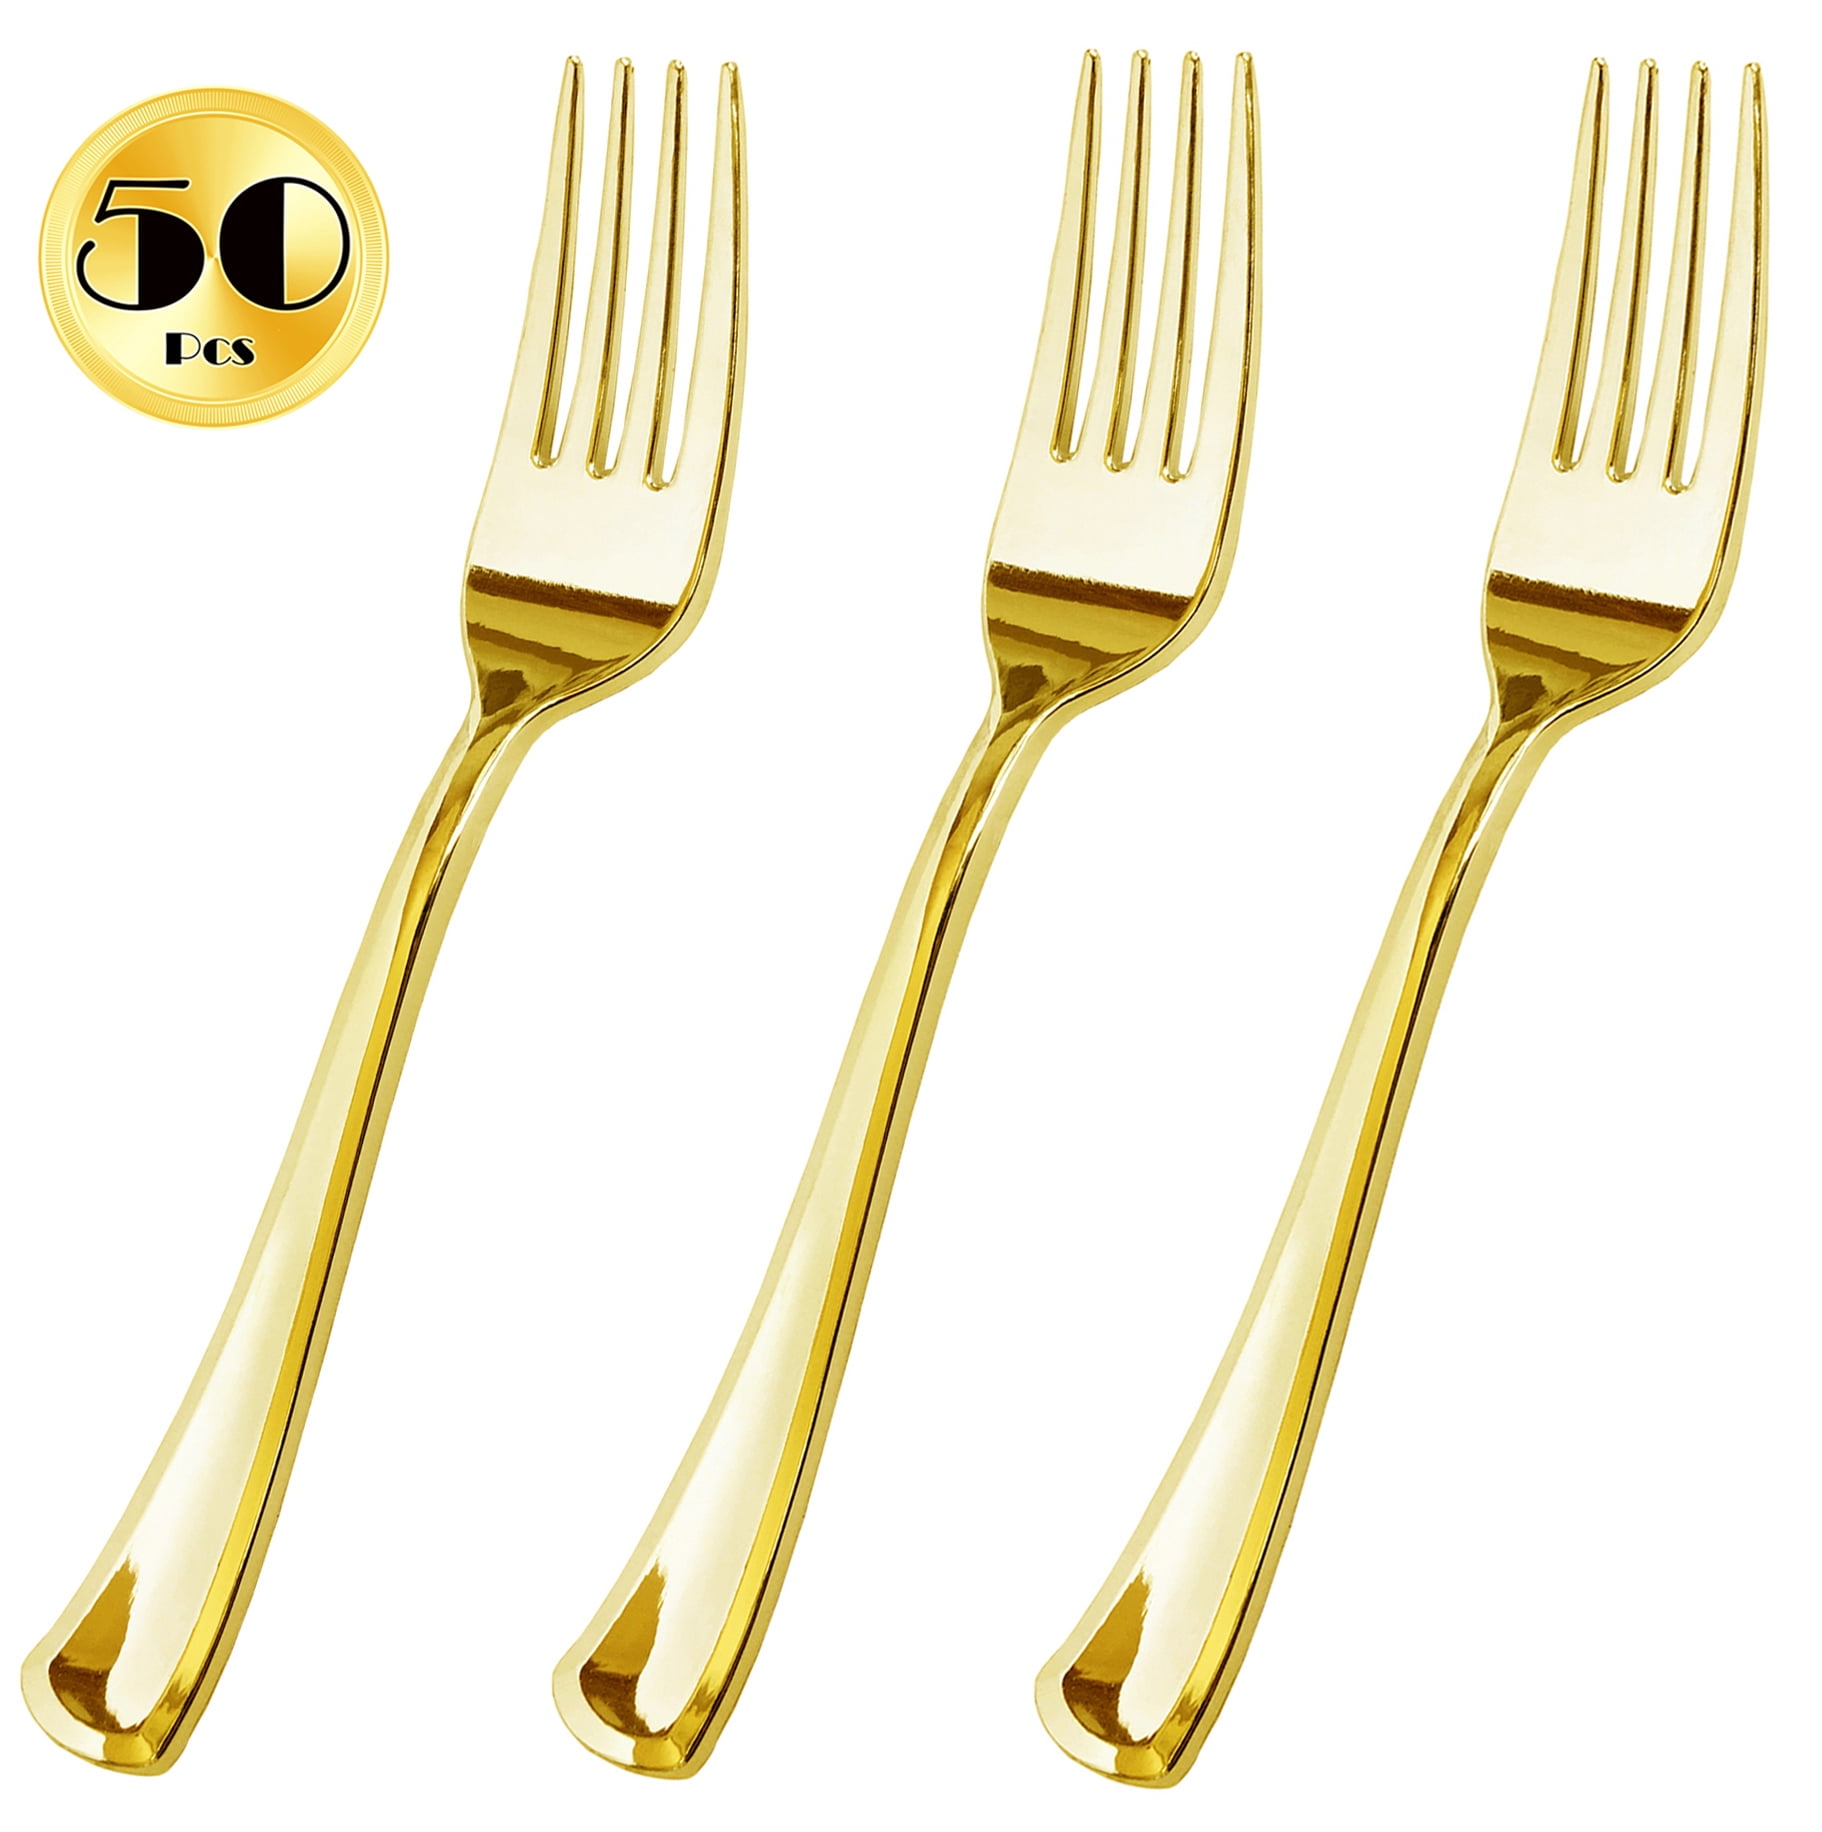 8" Silver Metallic Plastic Forks Party Wedding Catering Disposable Banquet SALE 